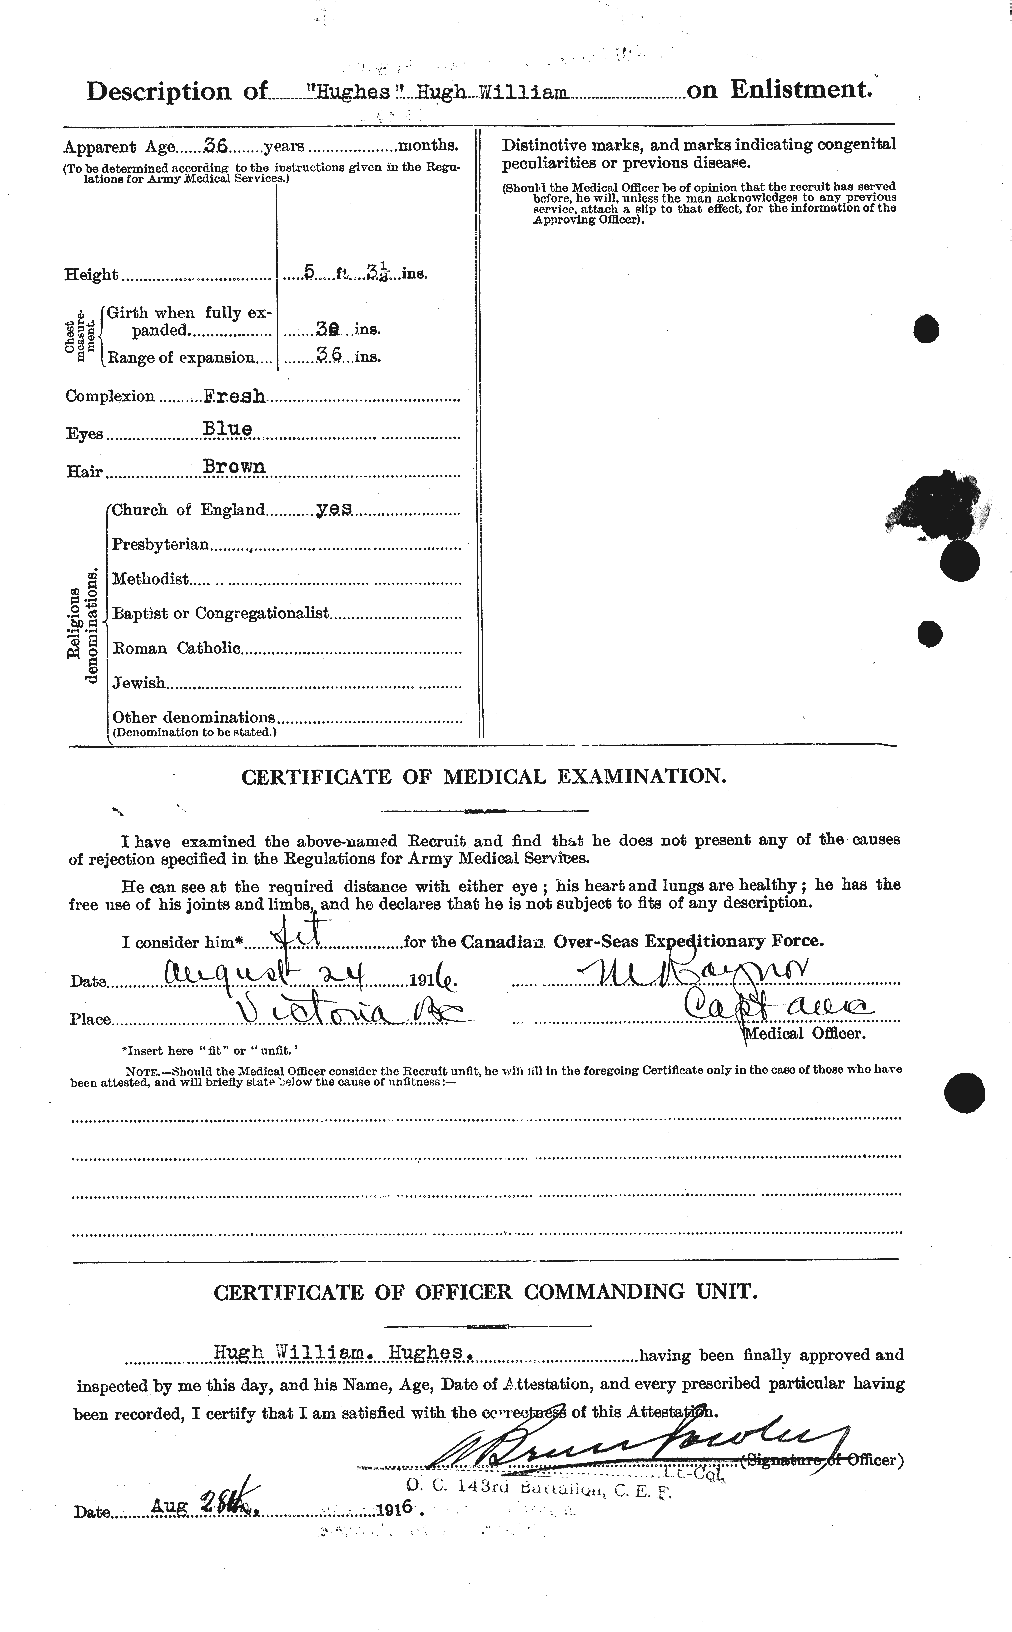 Personnel Records of the First World War - CEF 403931b